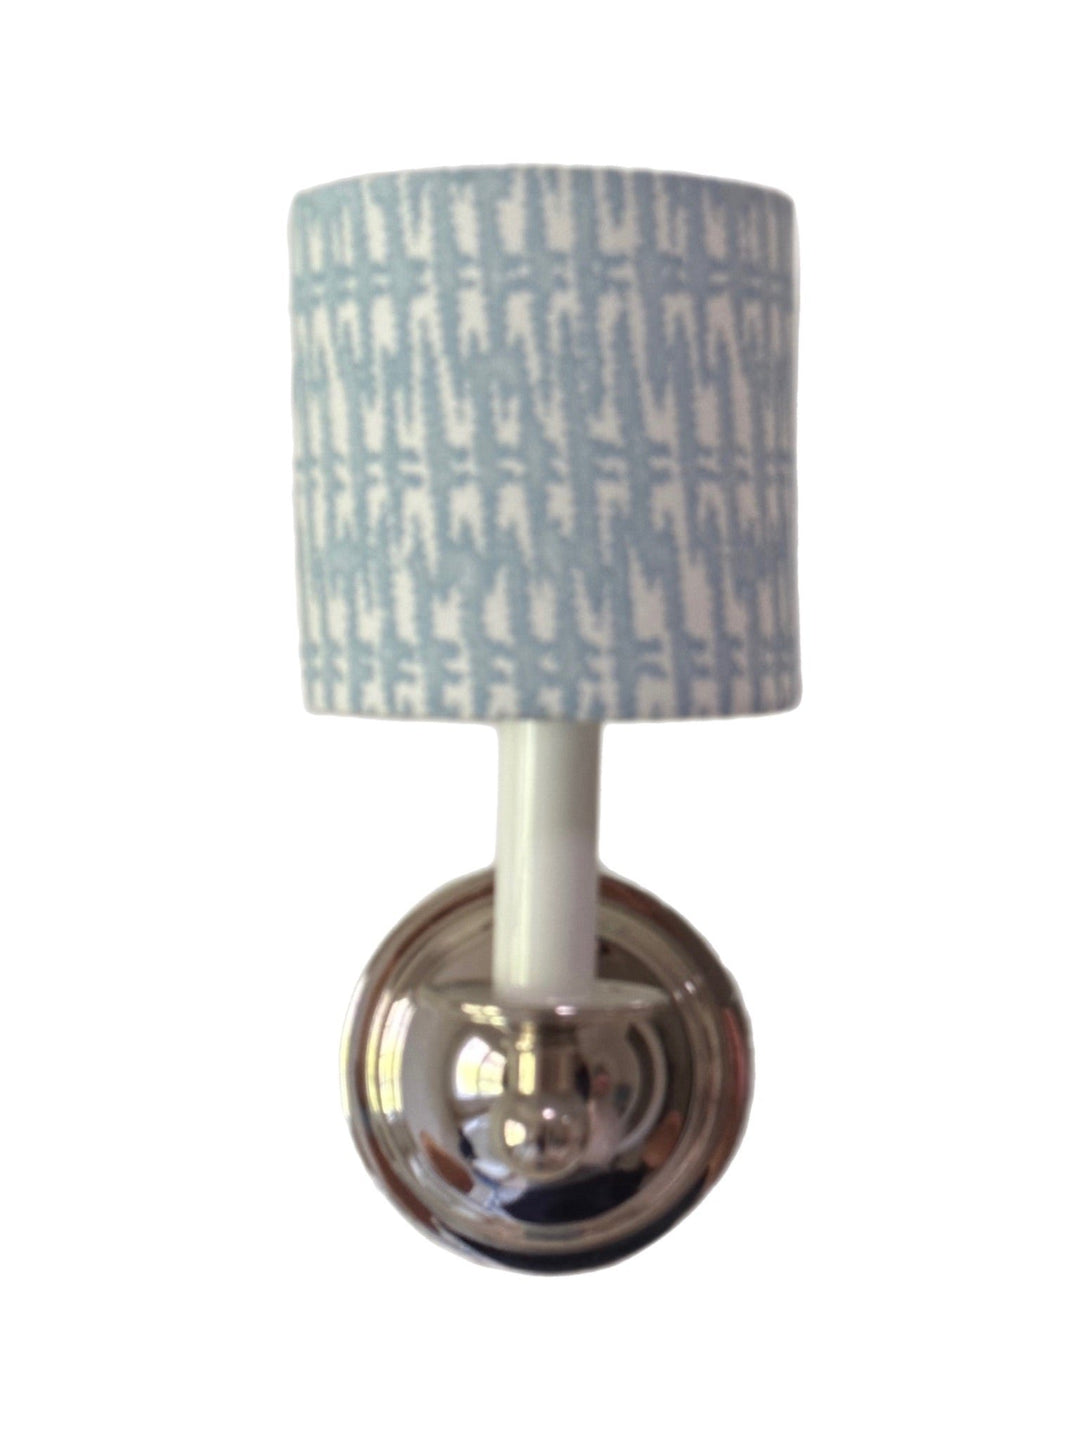 Custom Sconce Lamp Shade made with - 5" Half Drum with Candle Clip - (12 shades in stock) - Lux Lamp Shades